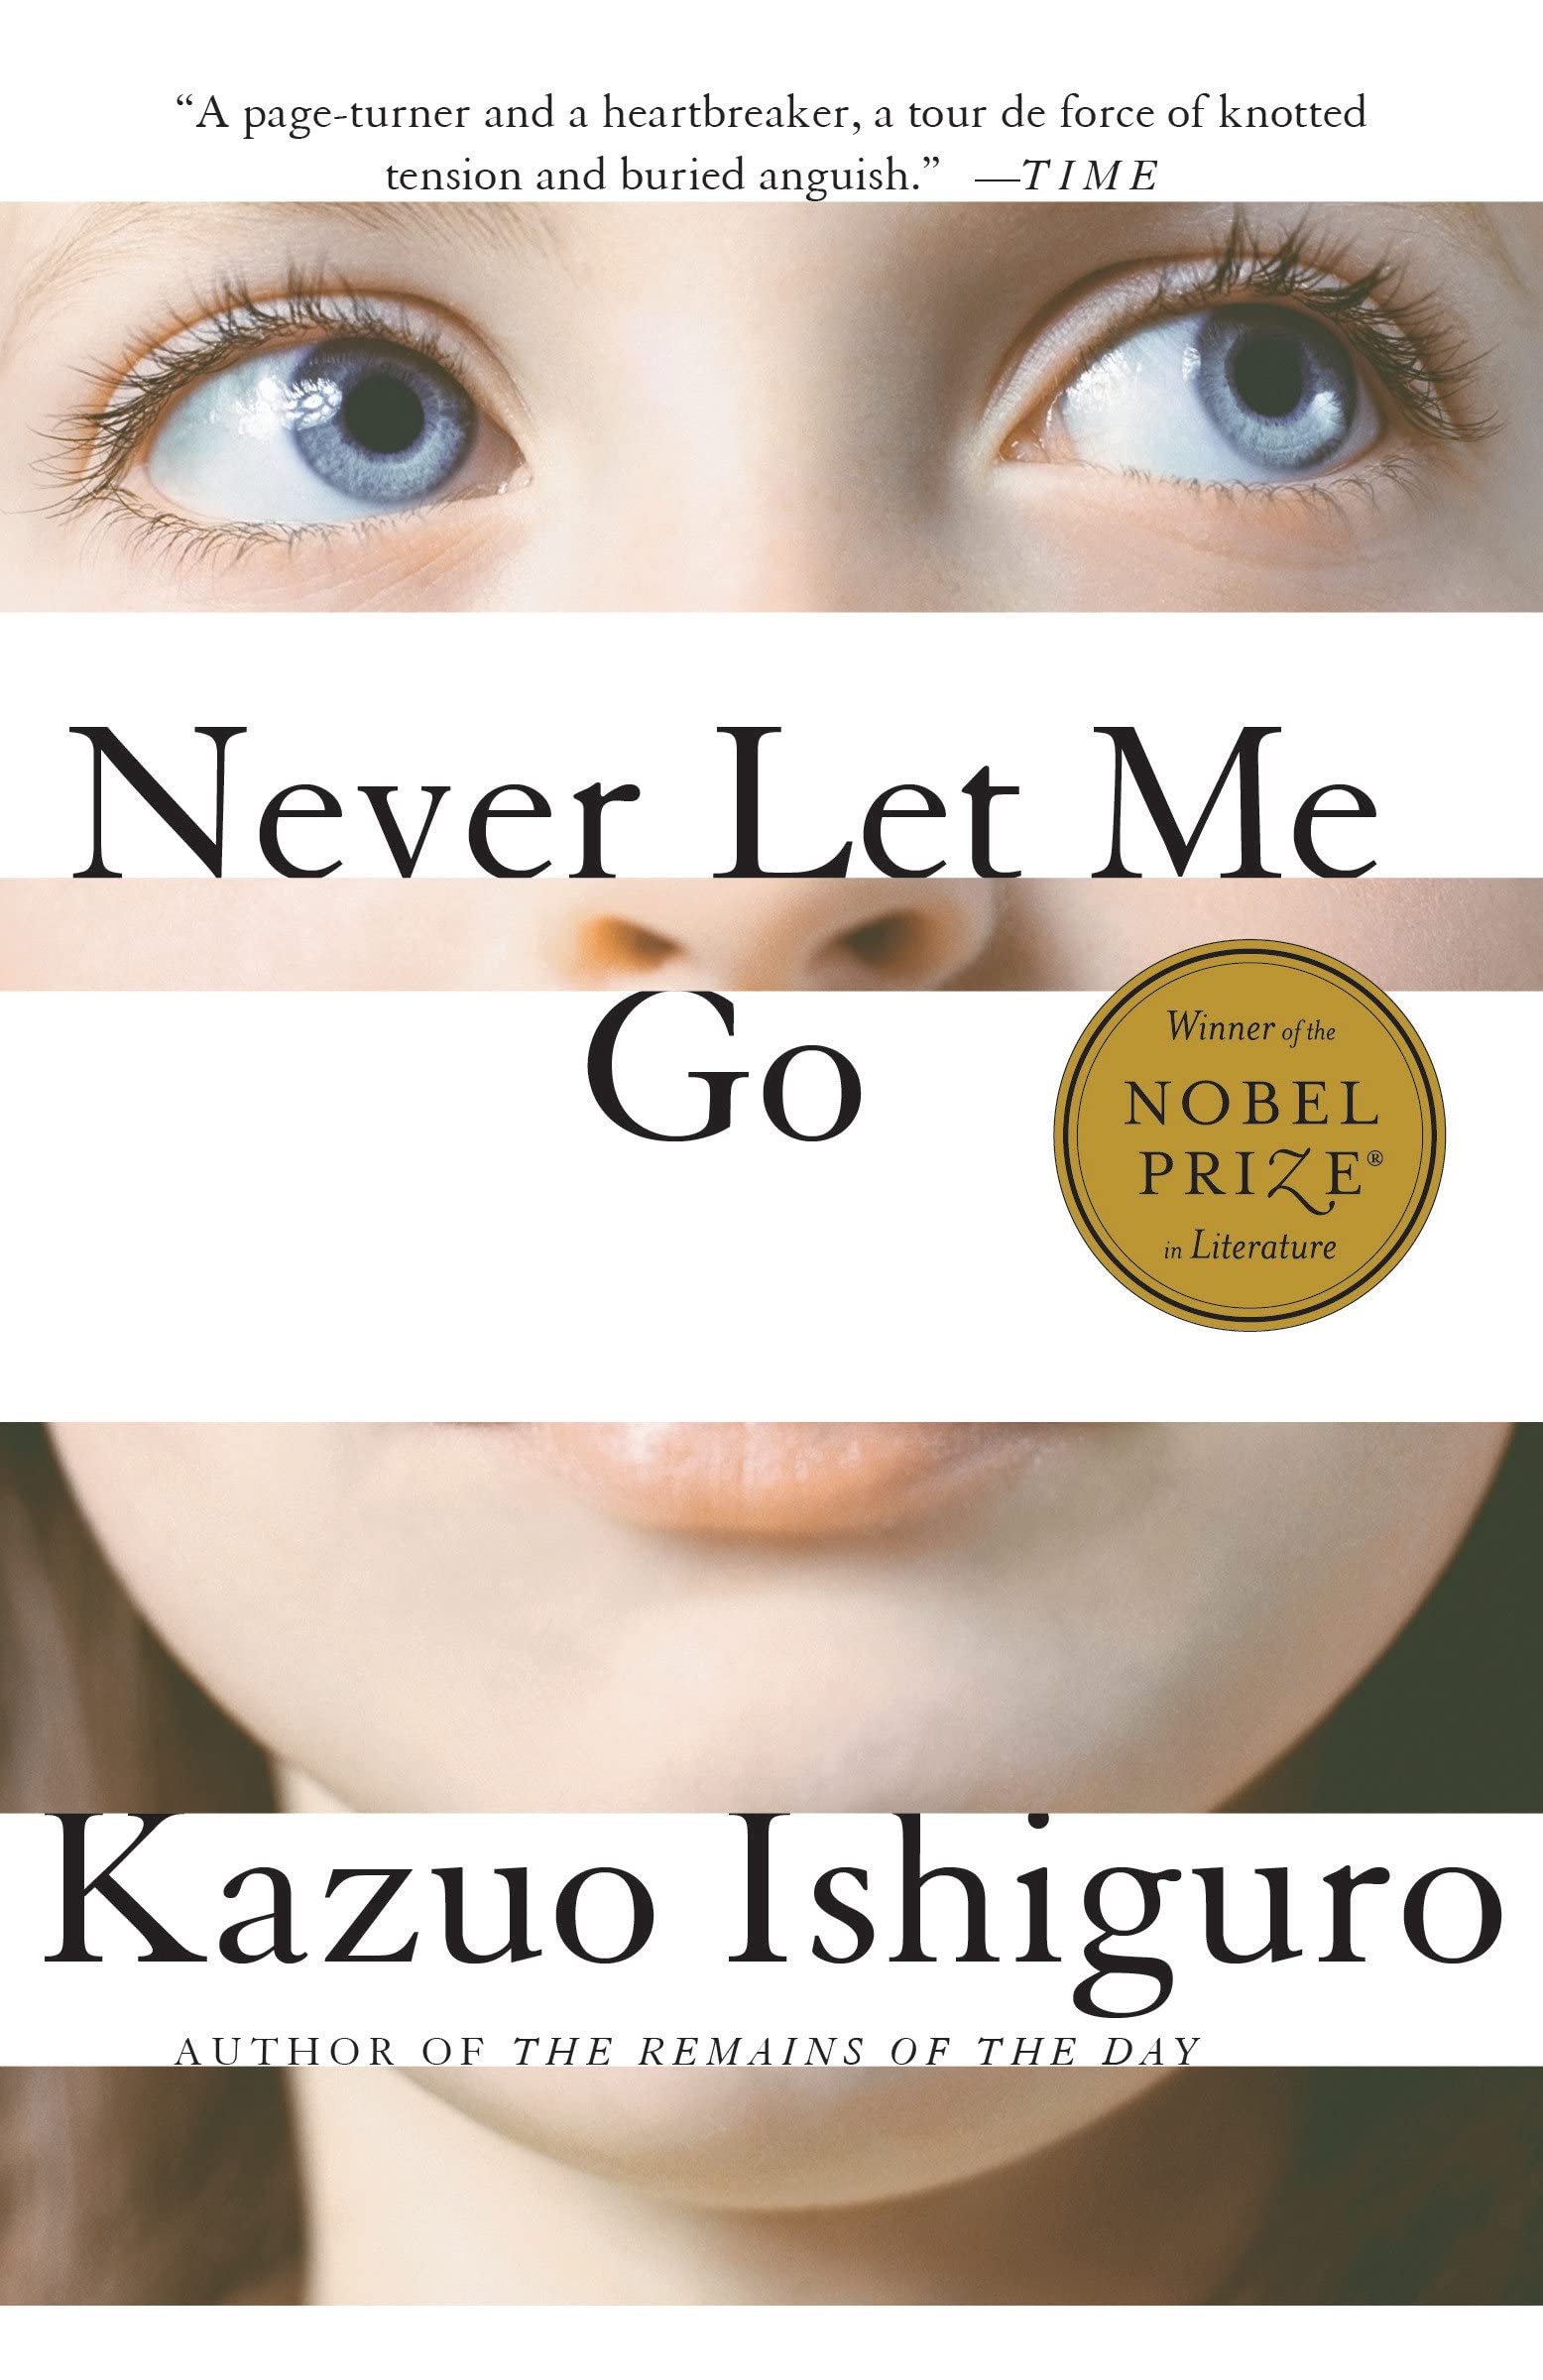 The best novel of 2005 (by Time): Never let me go audiobook